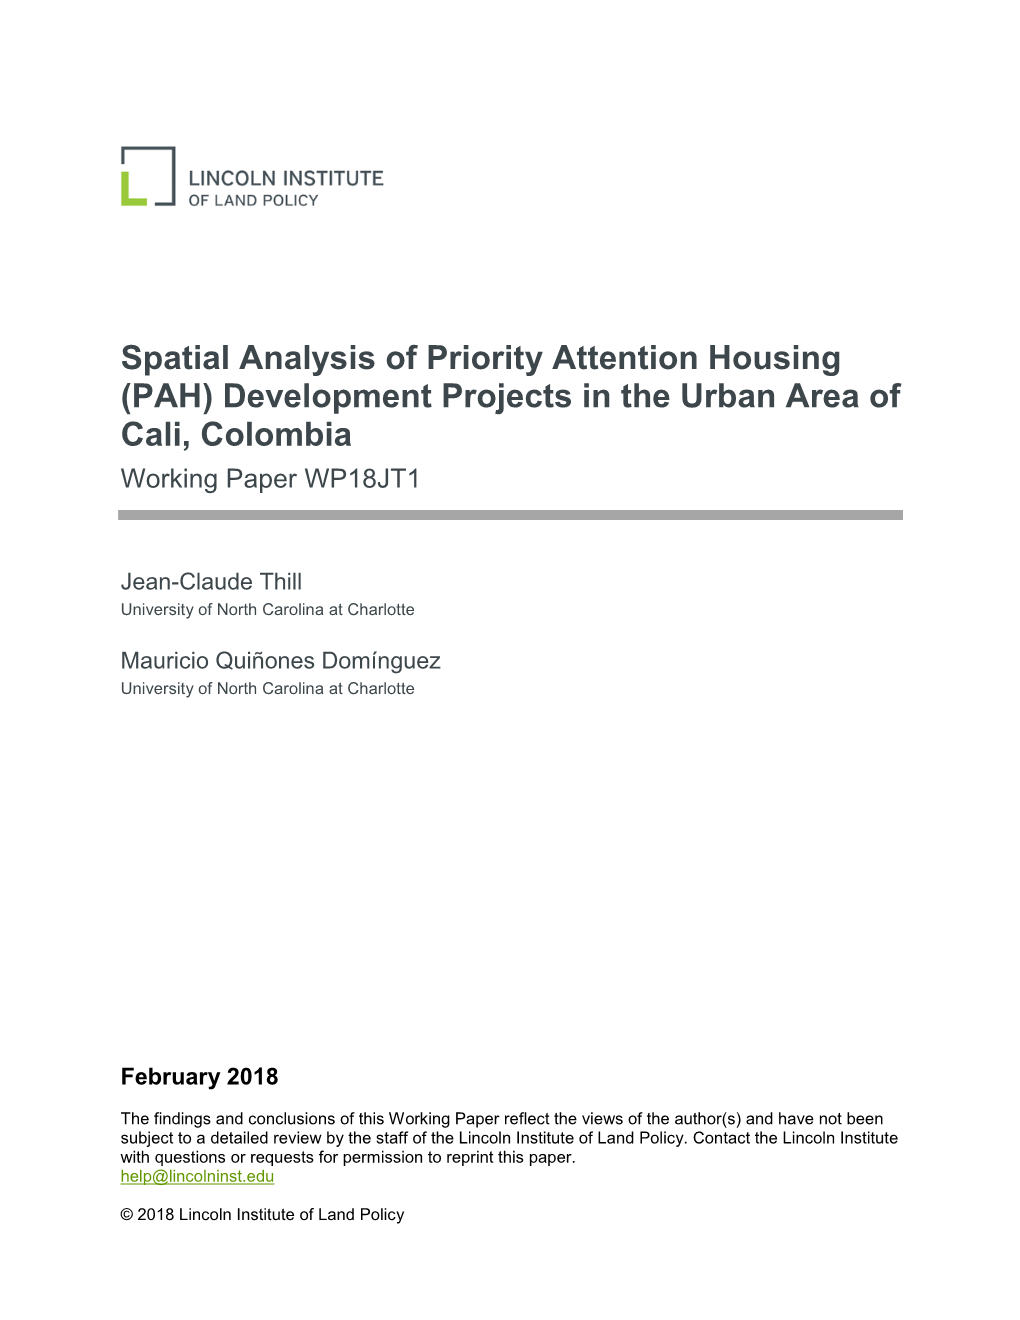 Spatial Analysis of Priority Attention Housing (PAH) Development Projects in the Urban Area of Cali, Columbia